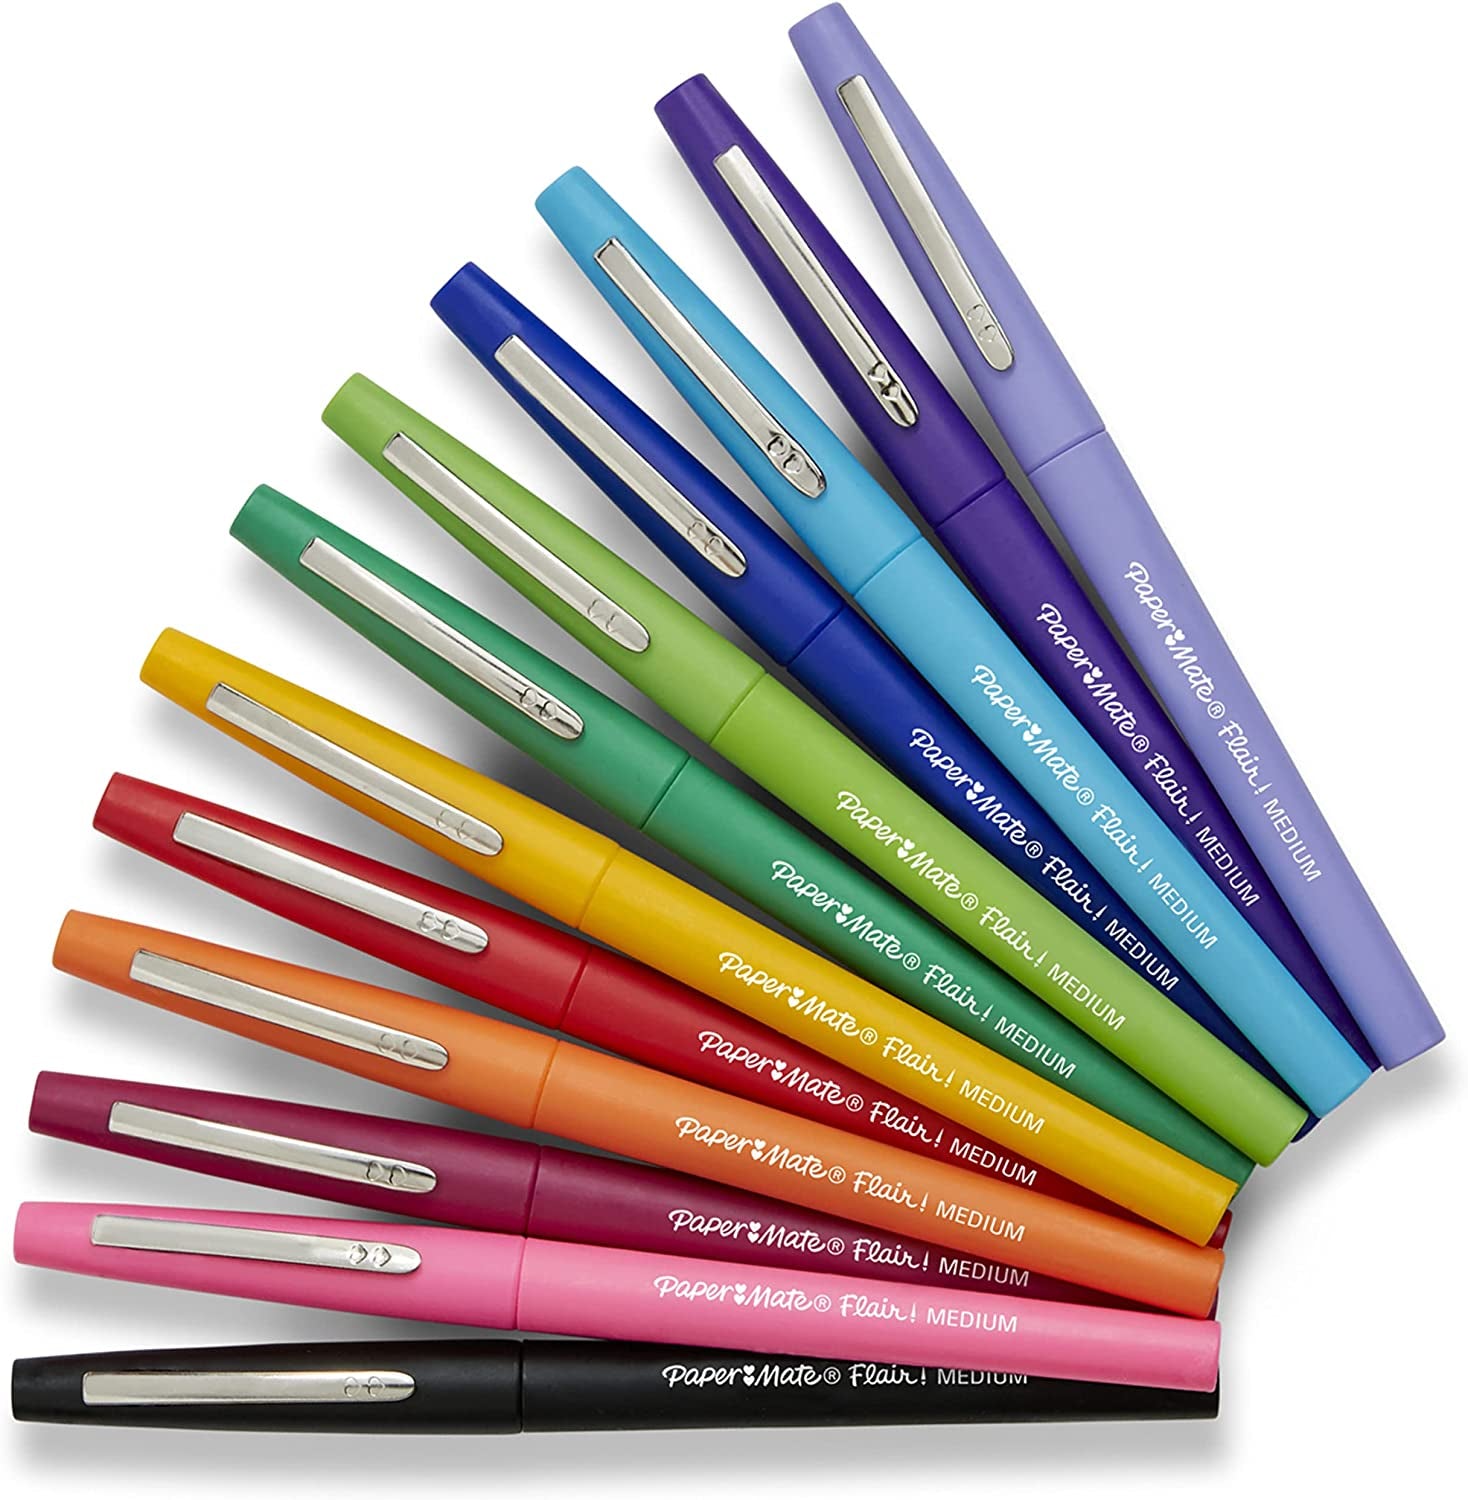 12 Assorted Colors Paper Mate Flair Felt Tip Pens - Bold, Smudge-Resistant Ink